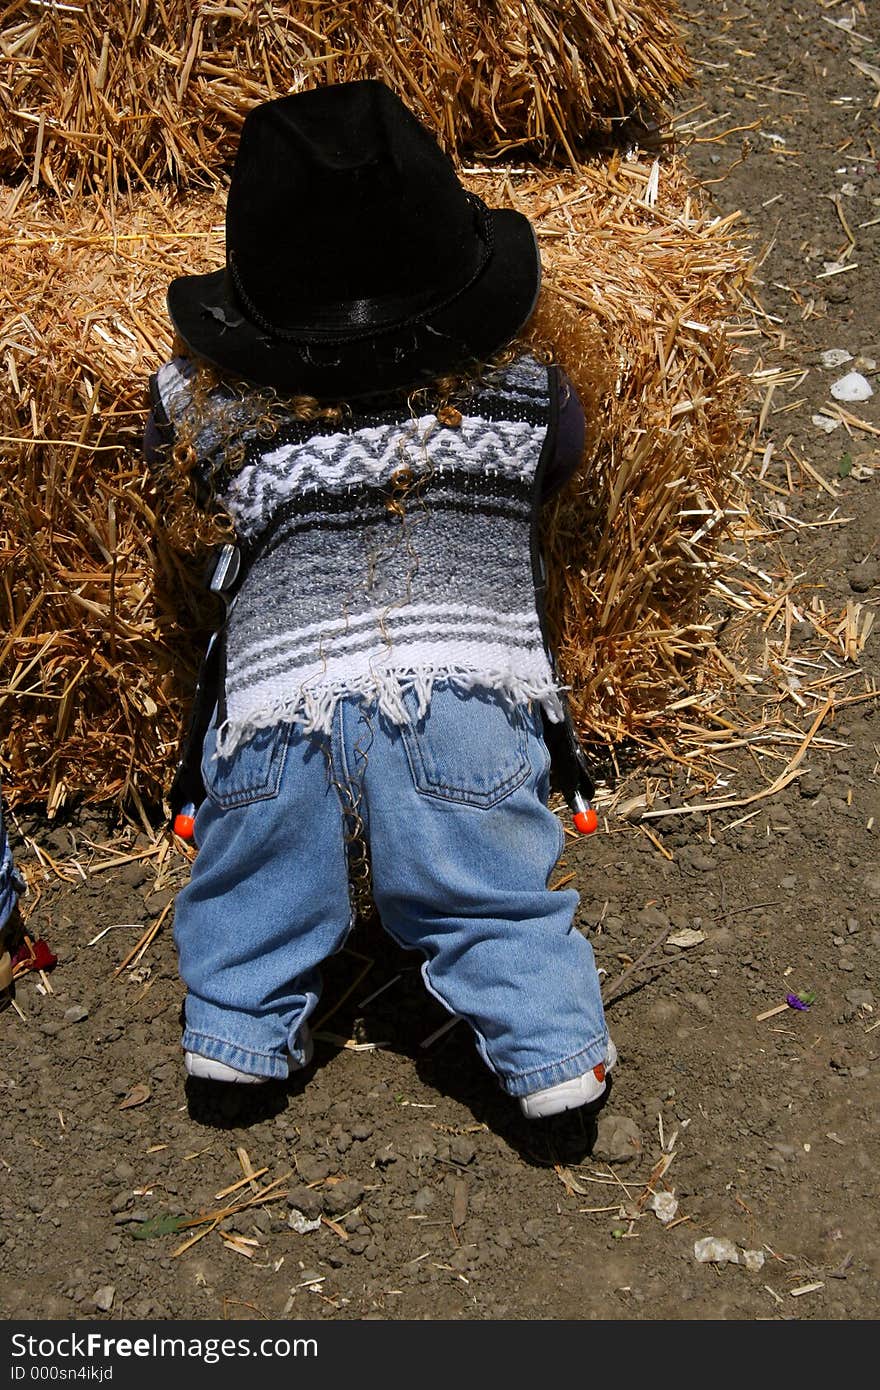 A toy doll dressed in farm clothing leans against a haystack at a farm in California. A toy doll dressed in farm clothing leans against a haystack at a farm in California.